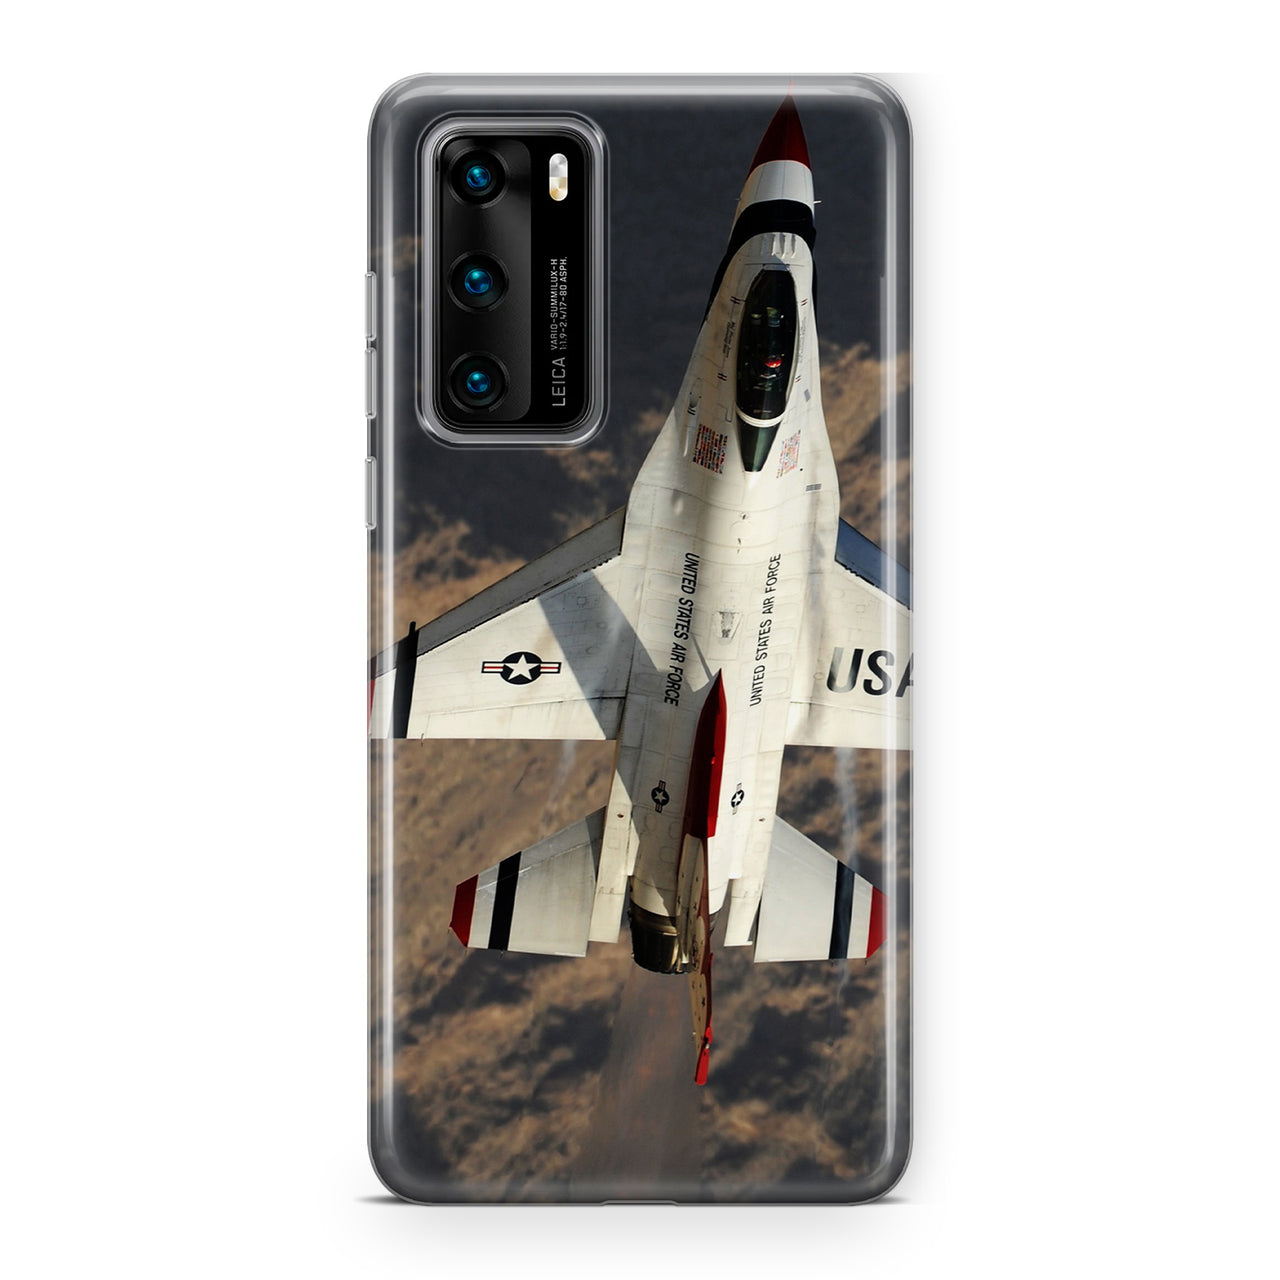 Amazing Show by Fighting Falcon F16 Designed Huawei Cases